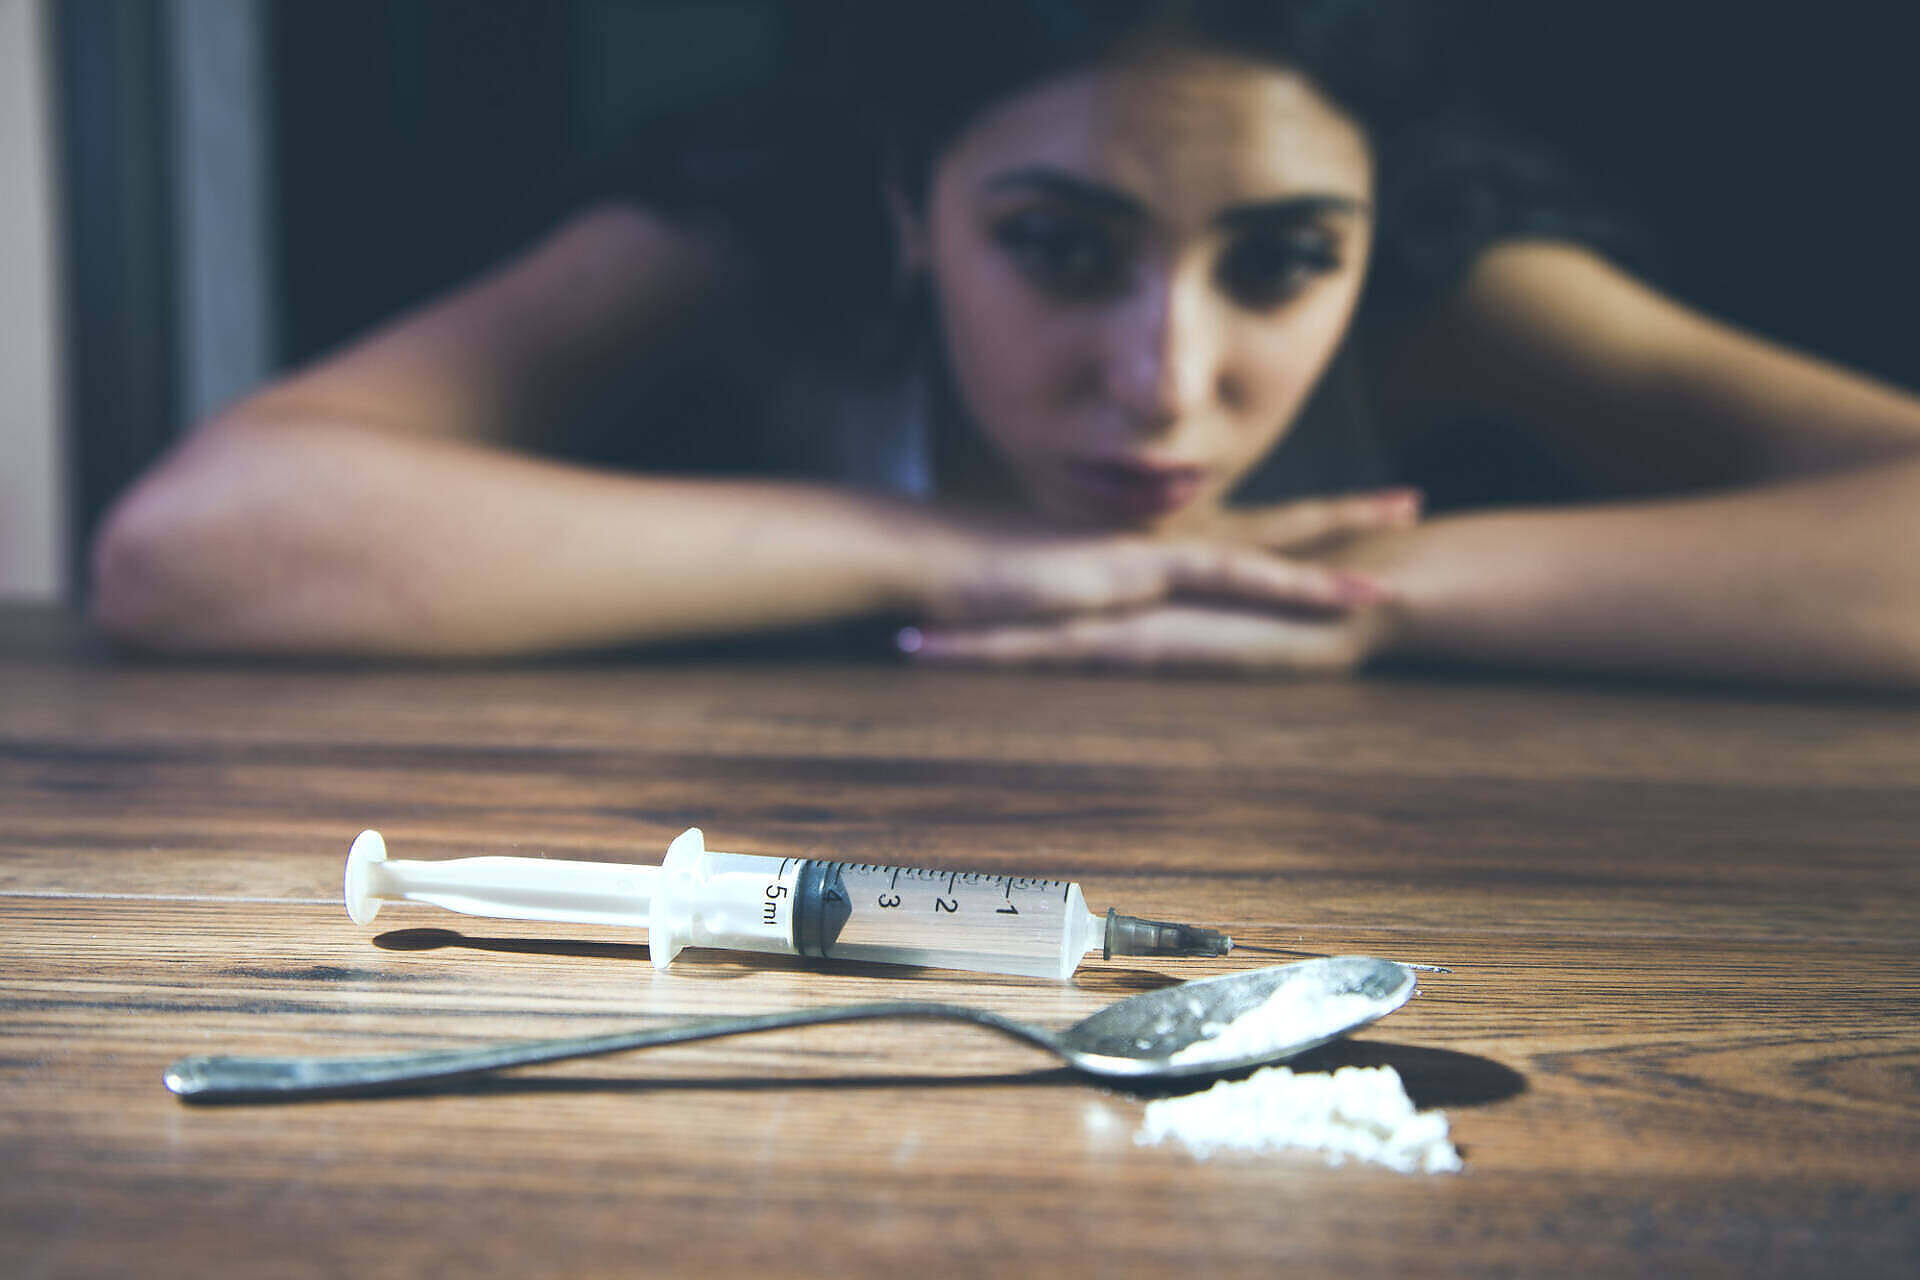 Woman looking distressed with drug paraphernalia including syringe and powder on table, depicting struggles with addiction